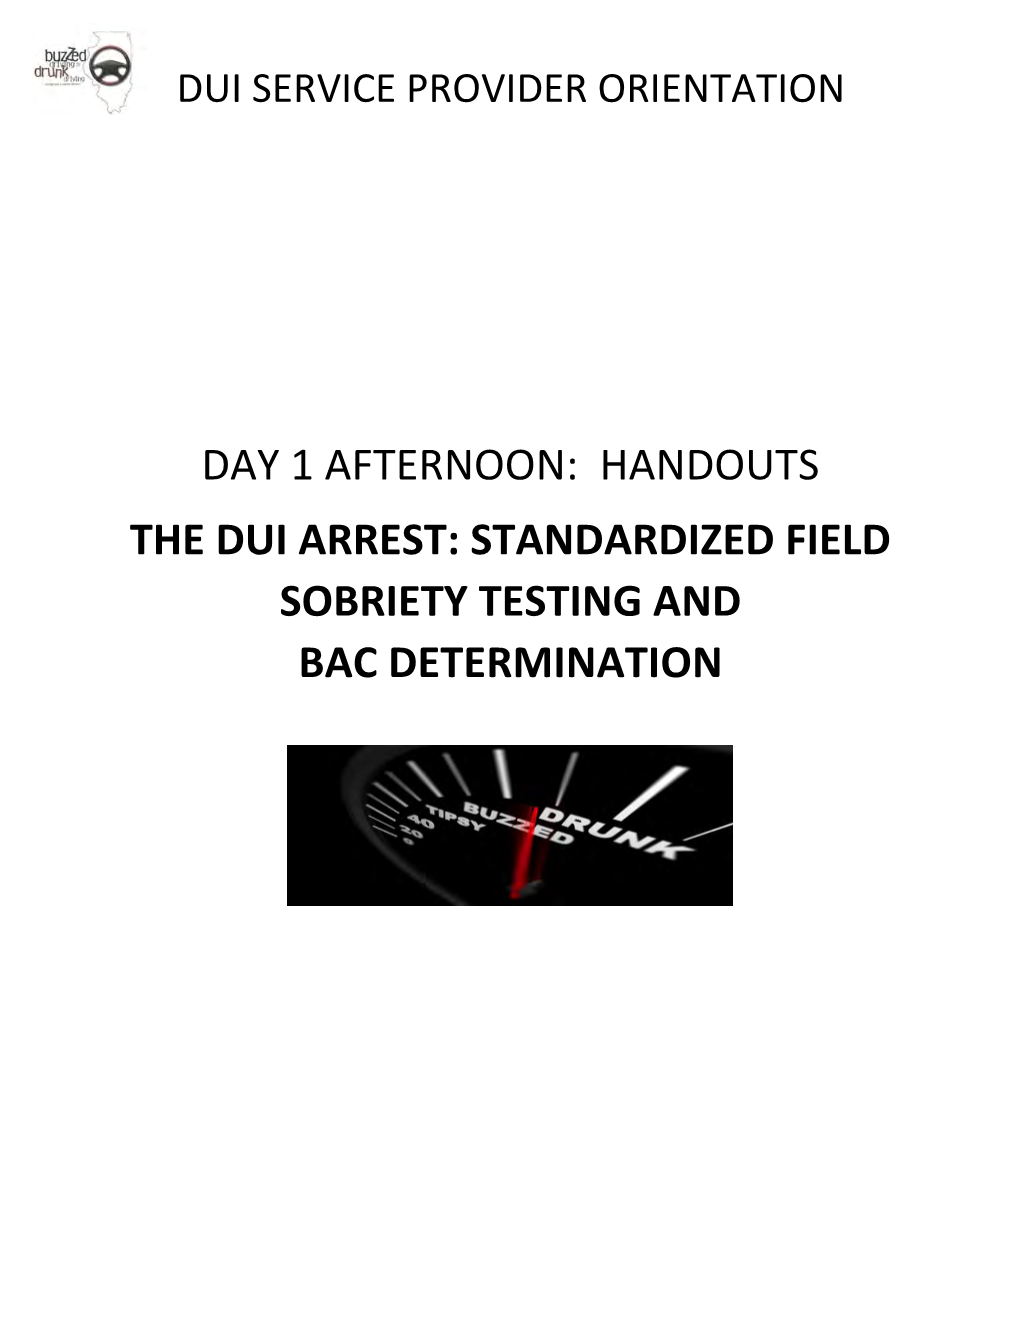 Day 1 Afternoon: Handouts the Dui Arrest: Standardized Field Sobriety Testing and Bac Determination